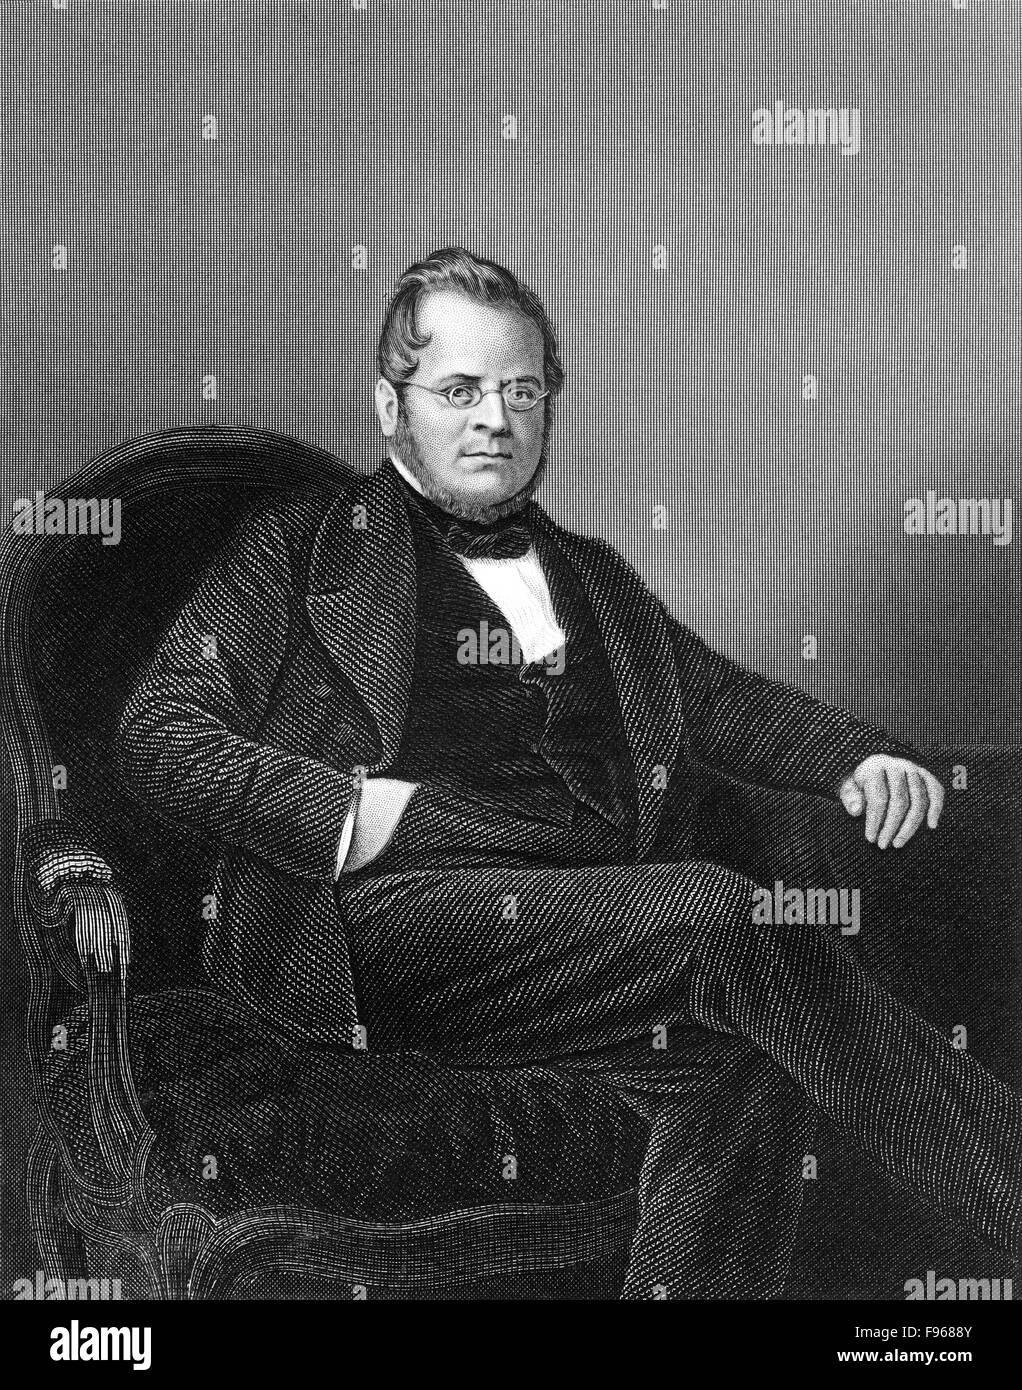 Camillo Benso, Count of Cavour, 1810 - 1861, an Italian statesman and first prime minister of the new Kingdom of Italy, Stock Photo